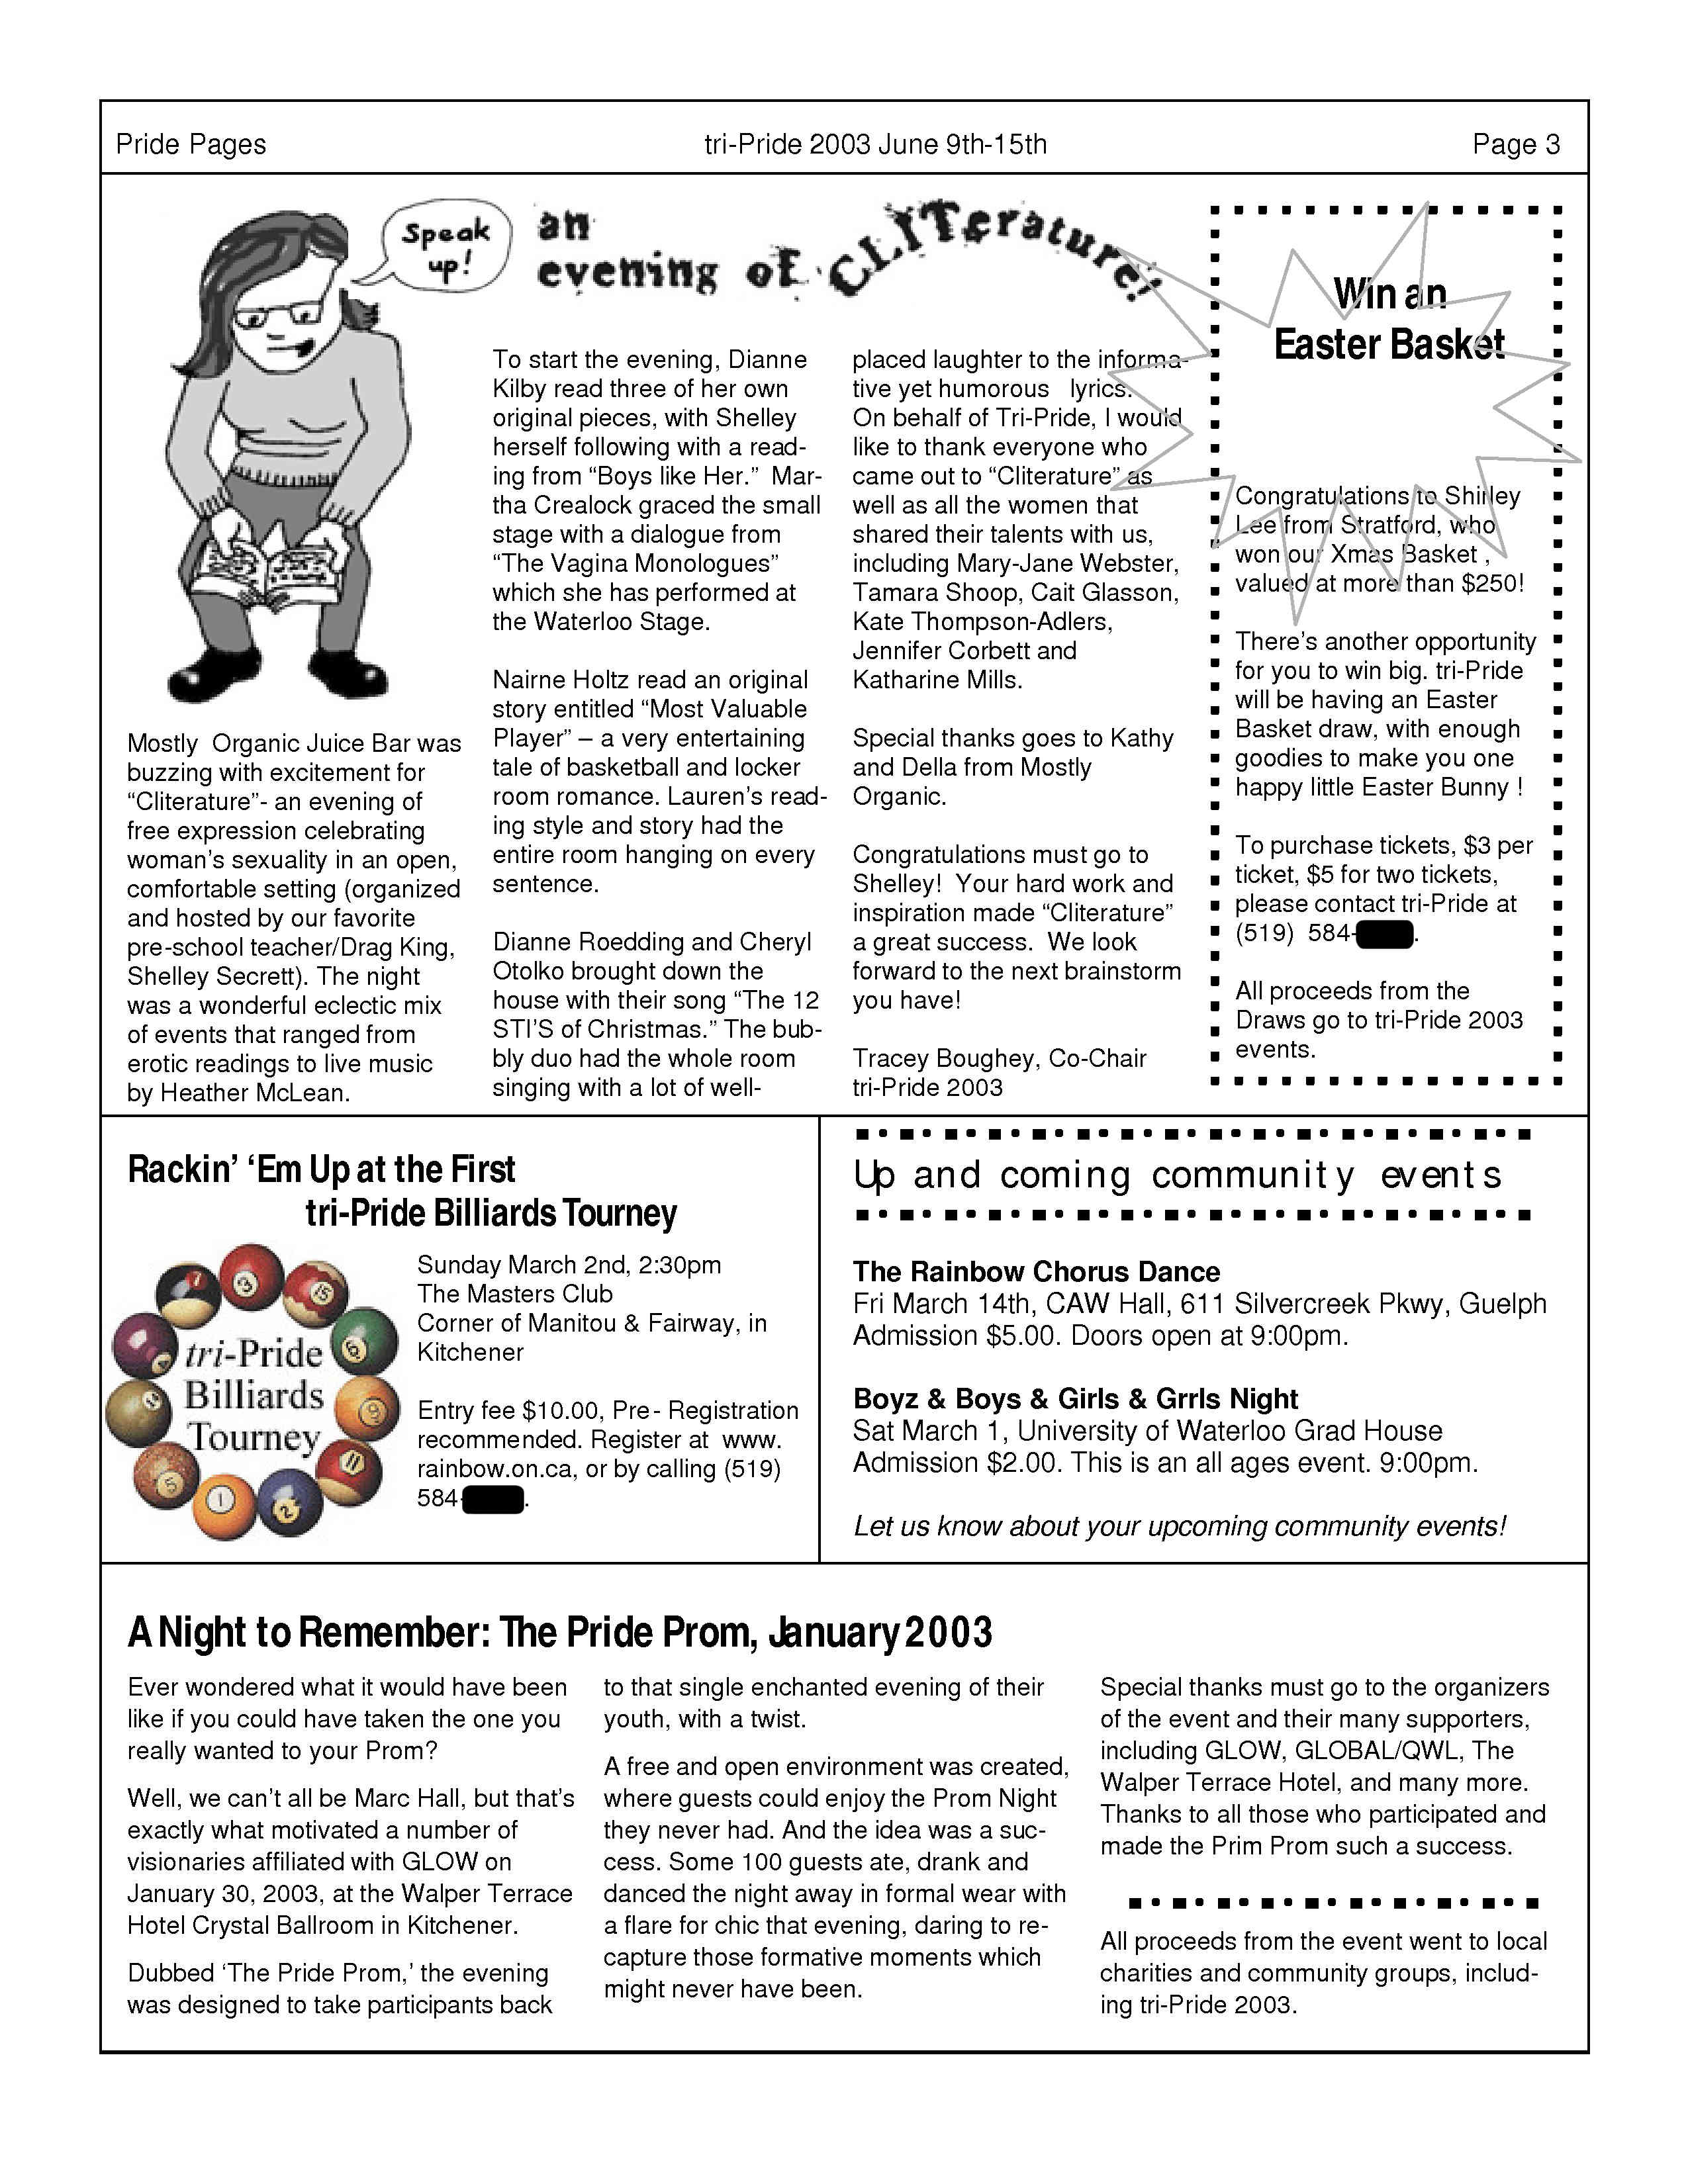 Pride Pages 2003-03 p3